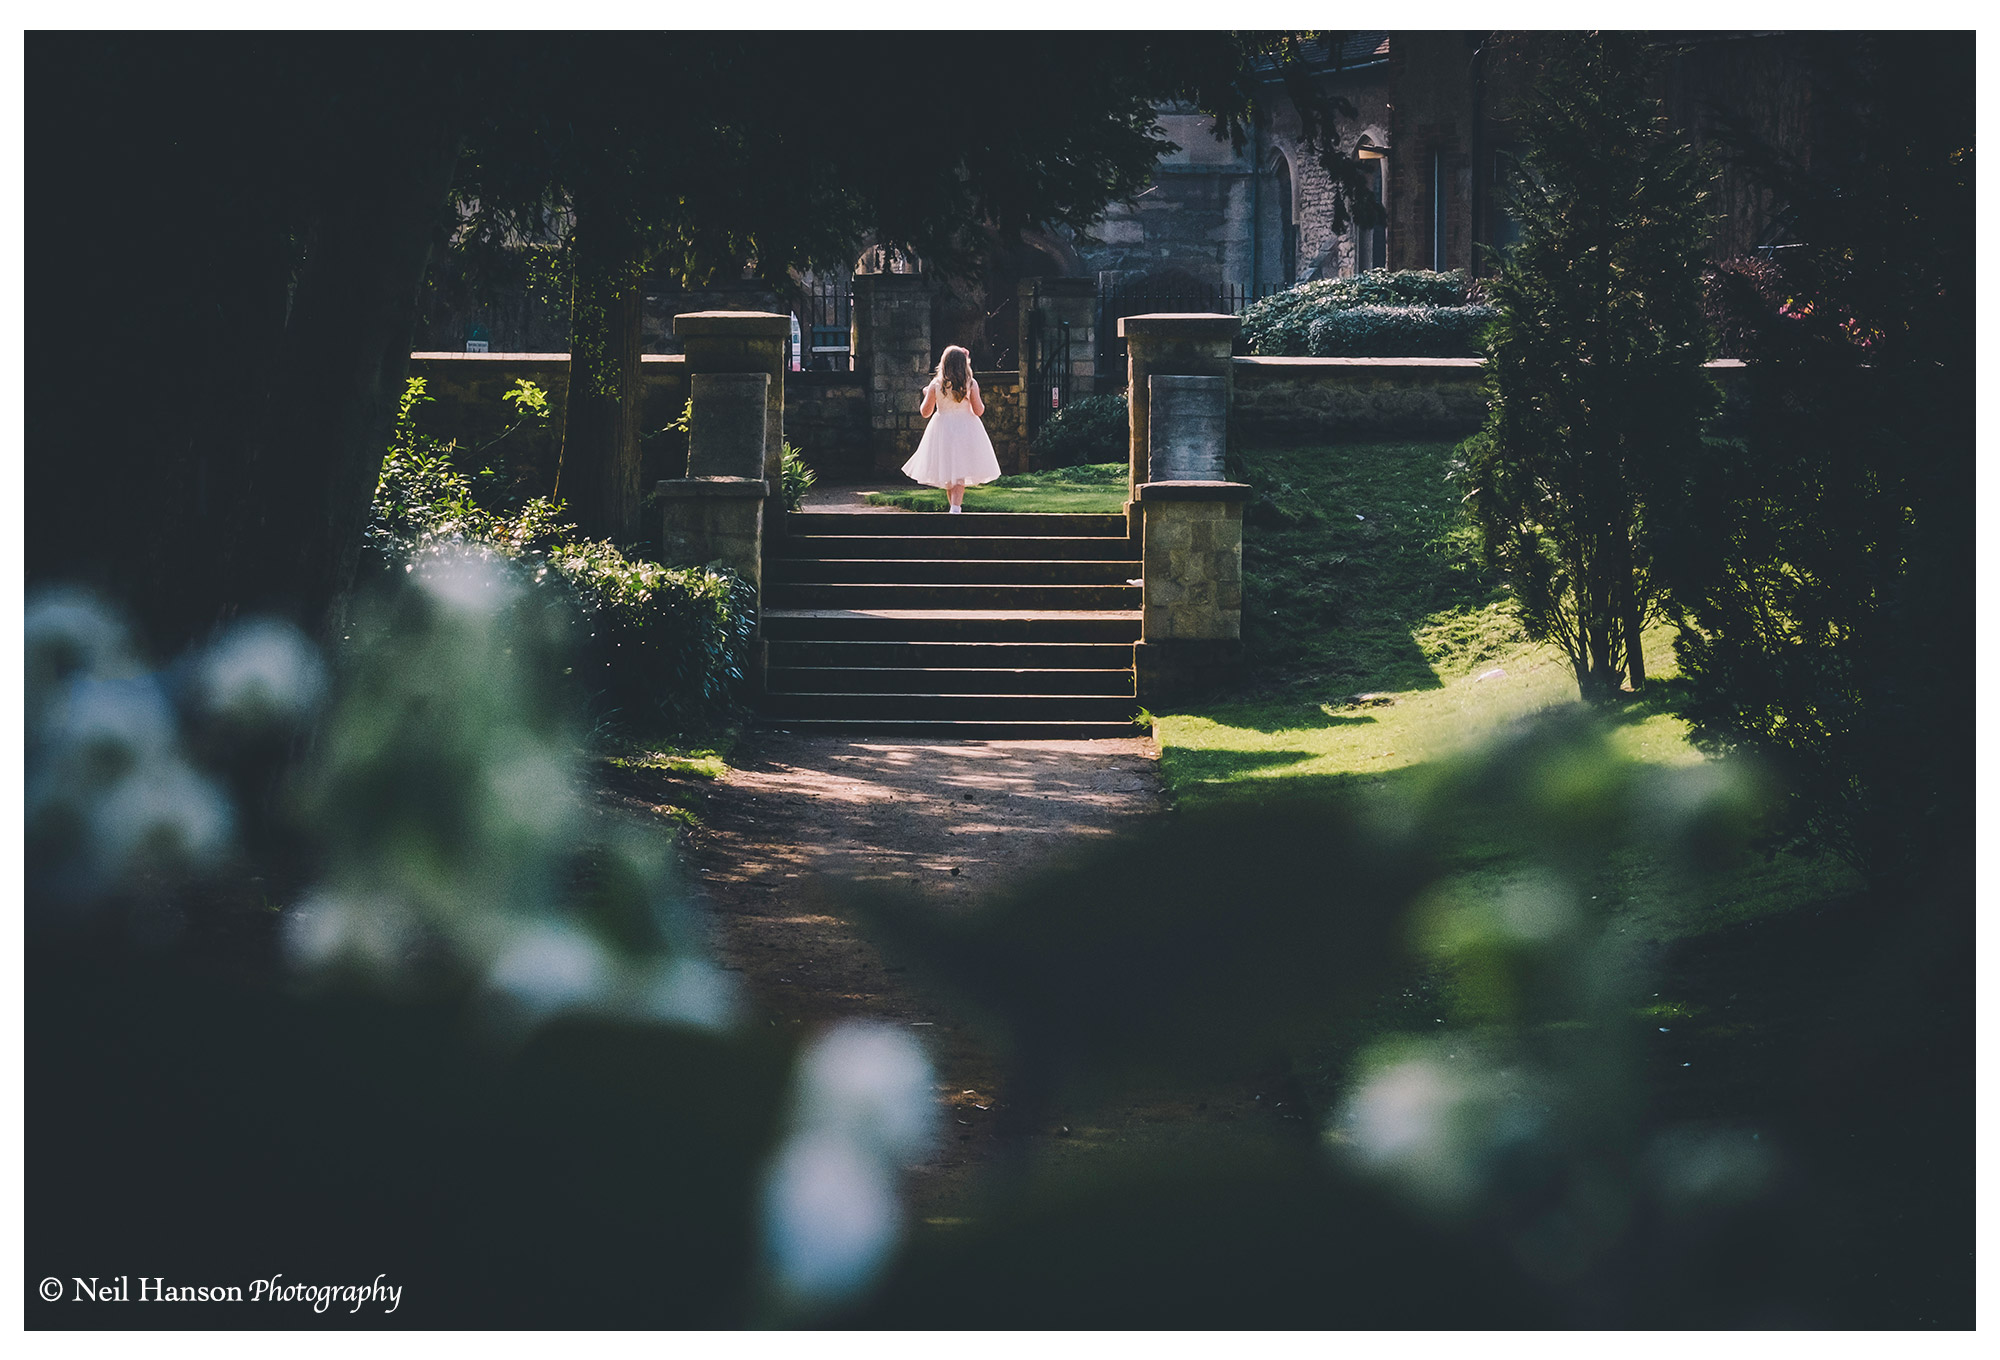 A flower girl in the grounds of Abbey gardens in Abingdon